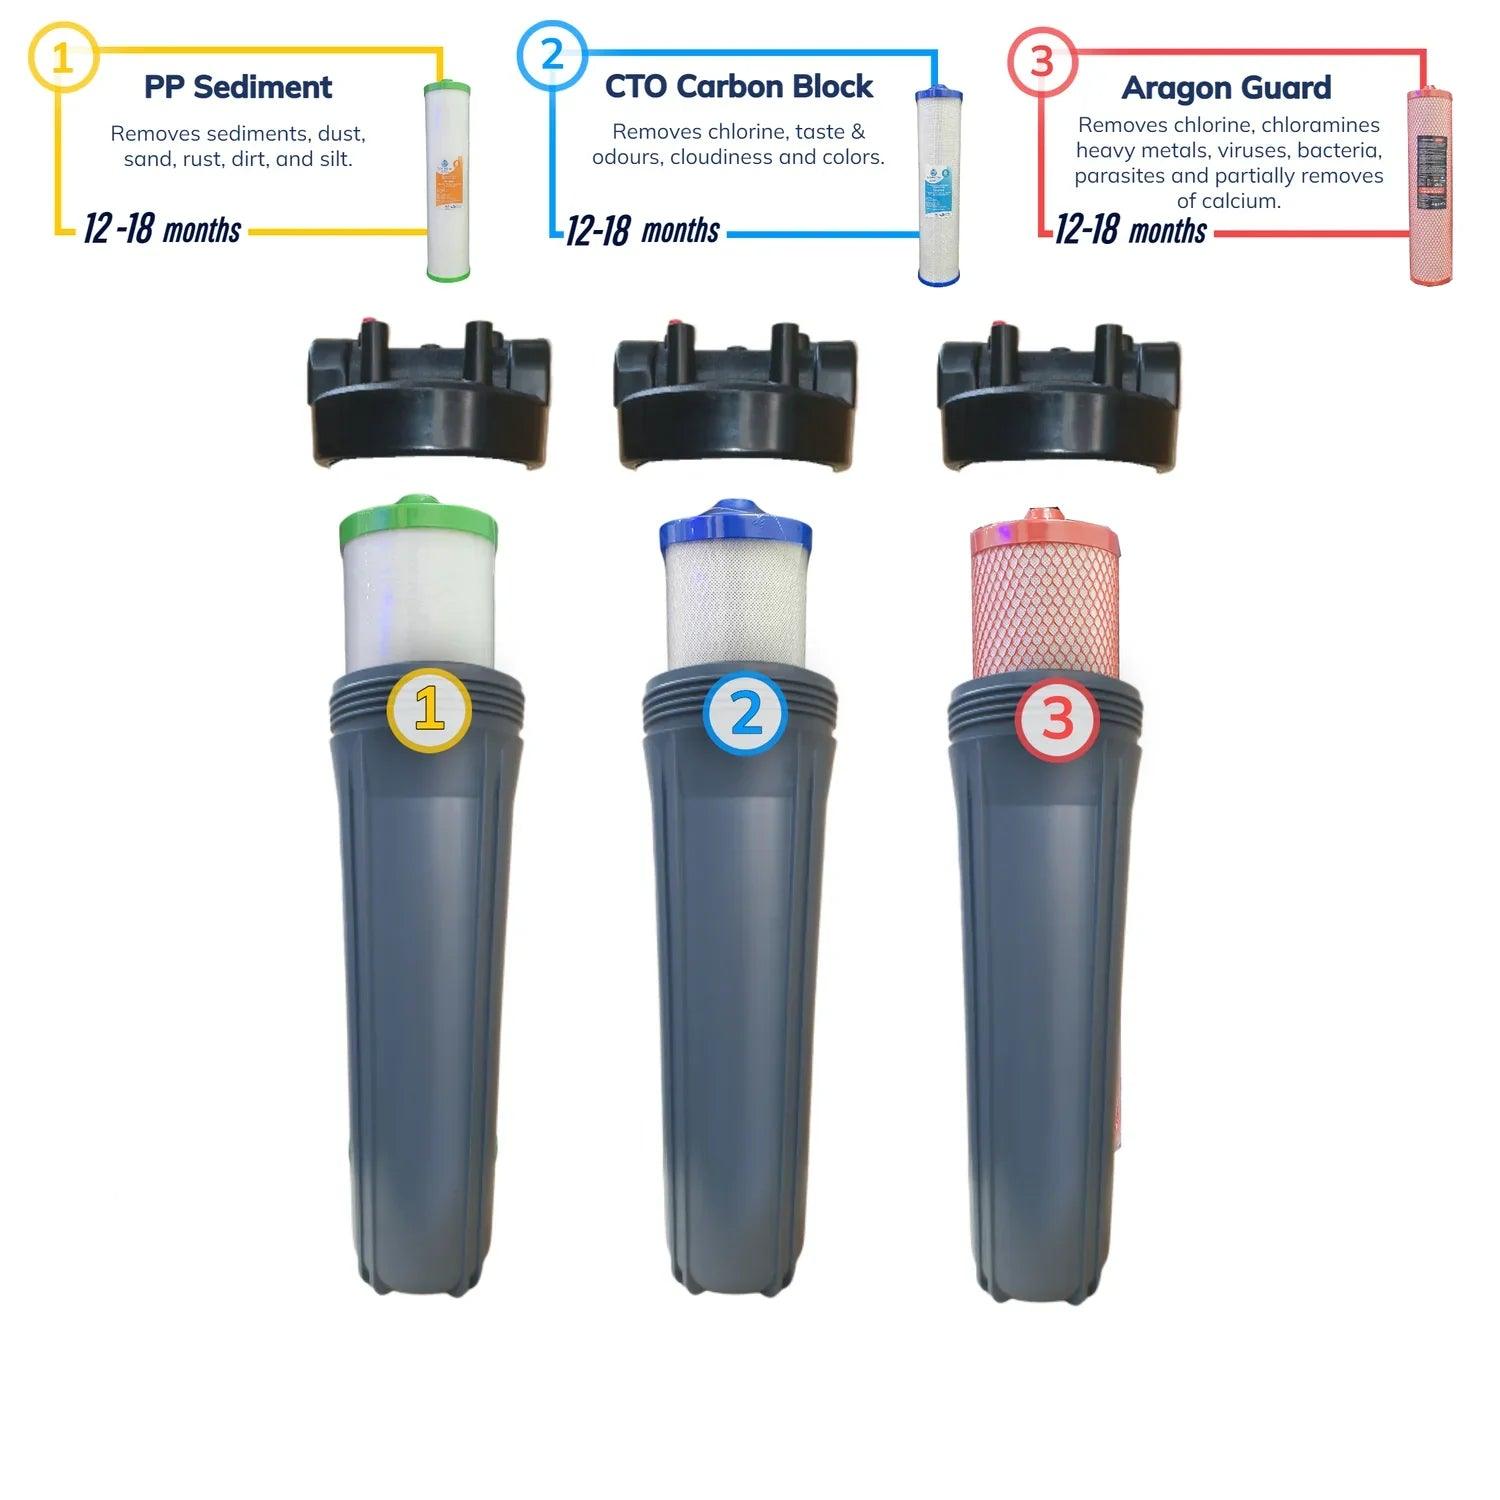 Whole House Water Filter System UF20 Pack - Alkaline World